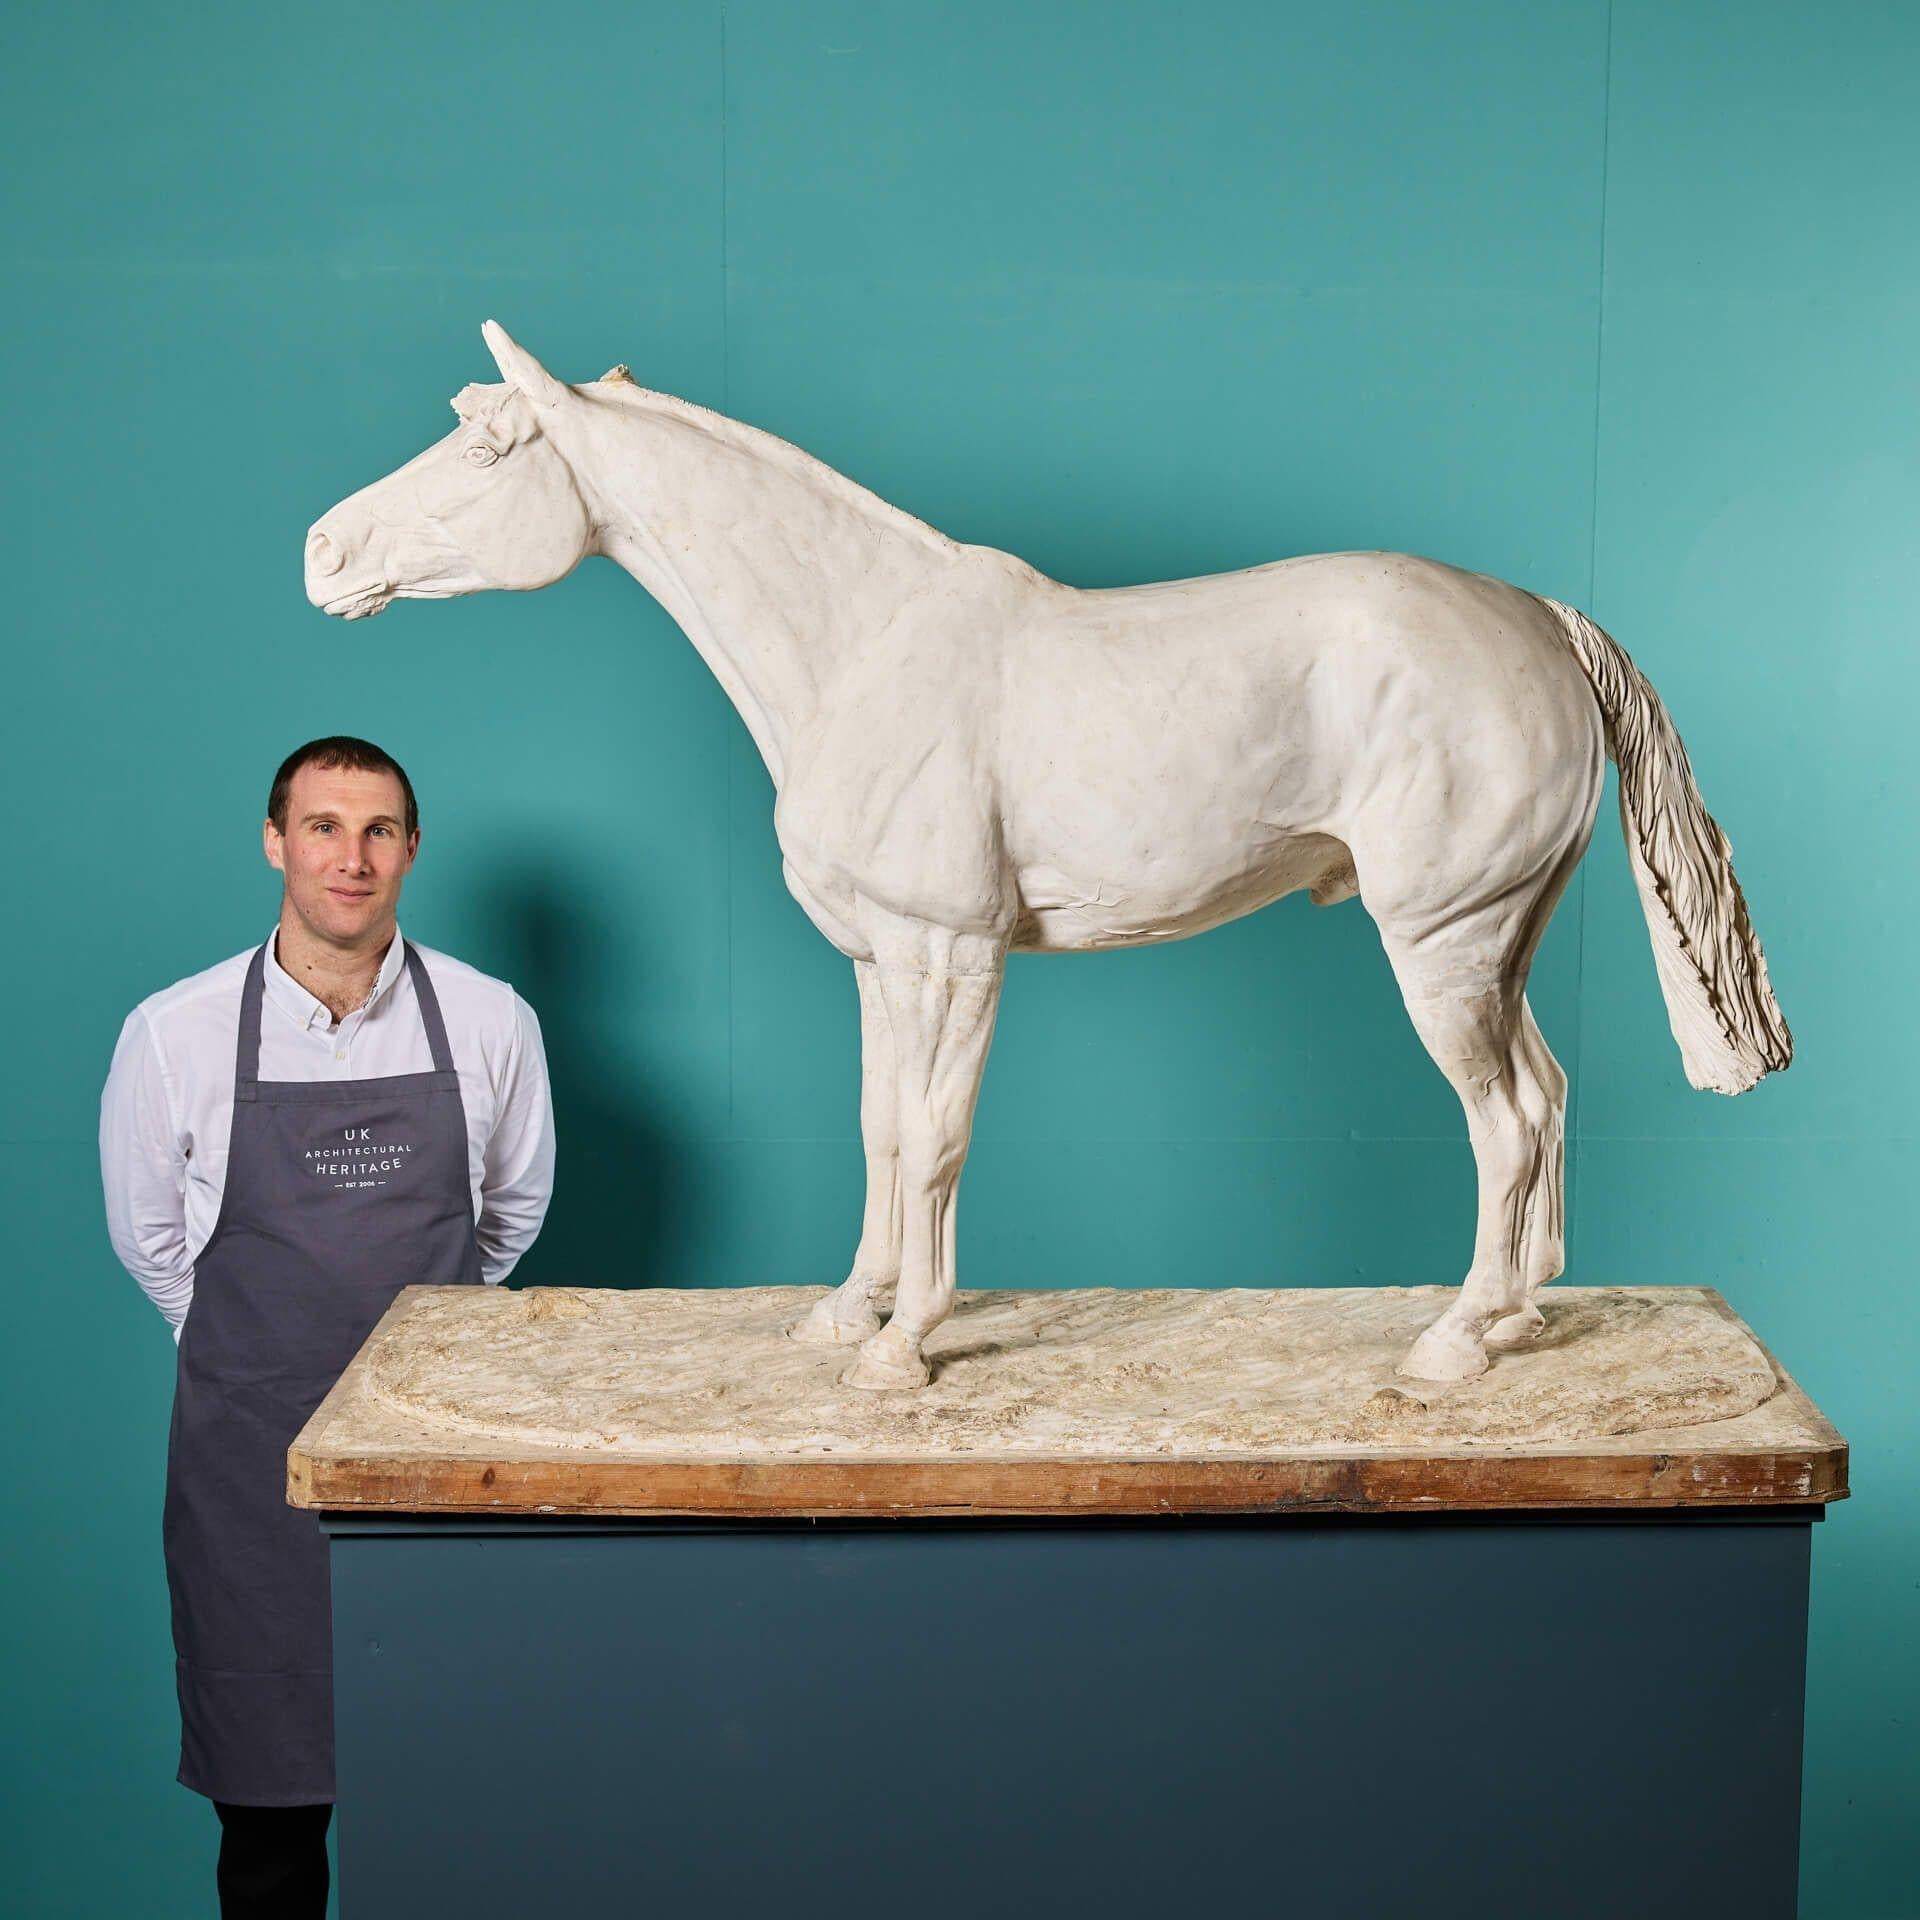 An impressive large plaster maquette statue of 20th century champion racehorse Red Rum by sculptor Annette Yarrow. This would’ve been used to create the original in bronze.

Red Rum was a thoroughbred steeplechaser who won the esteemed Grand